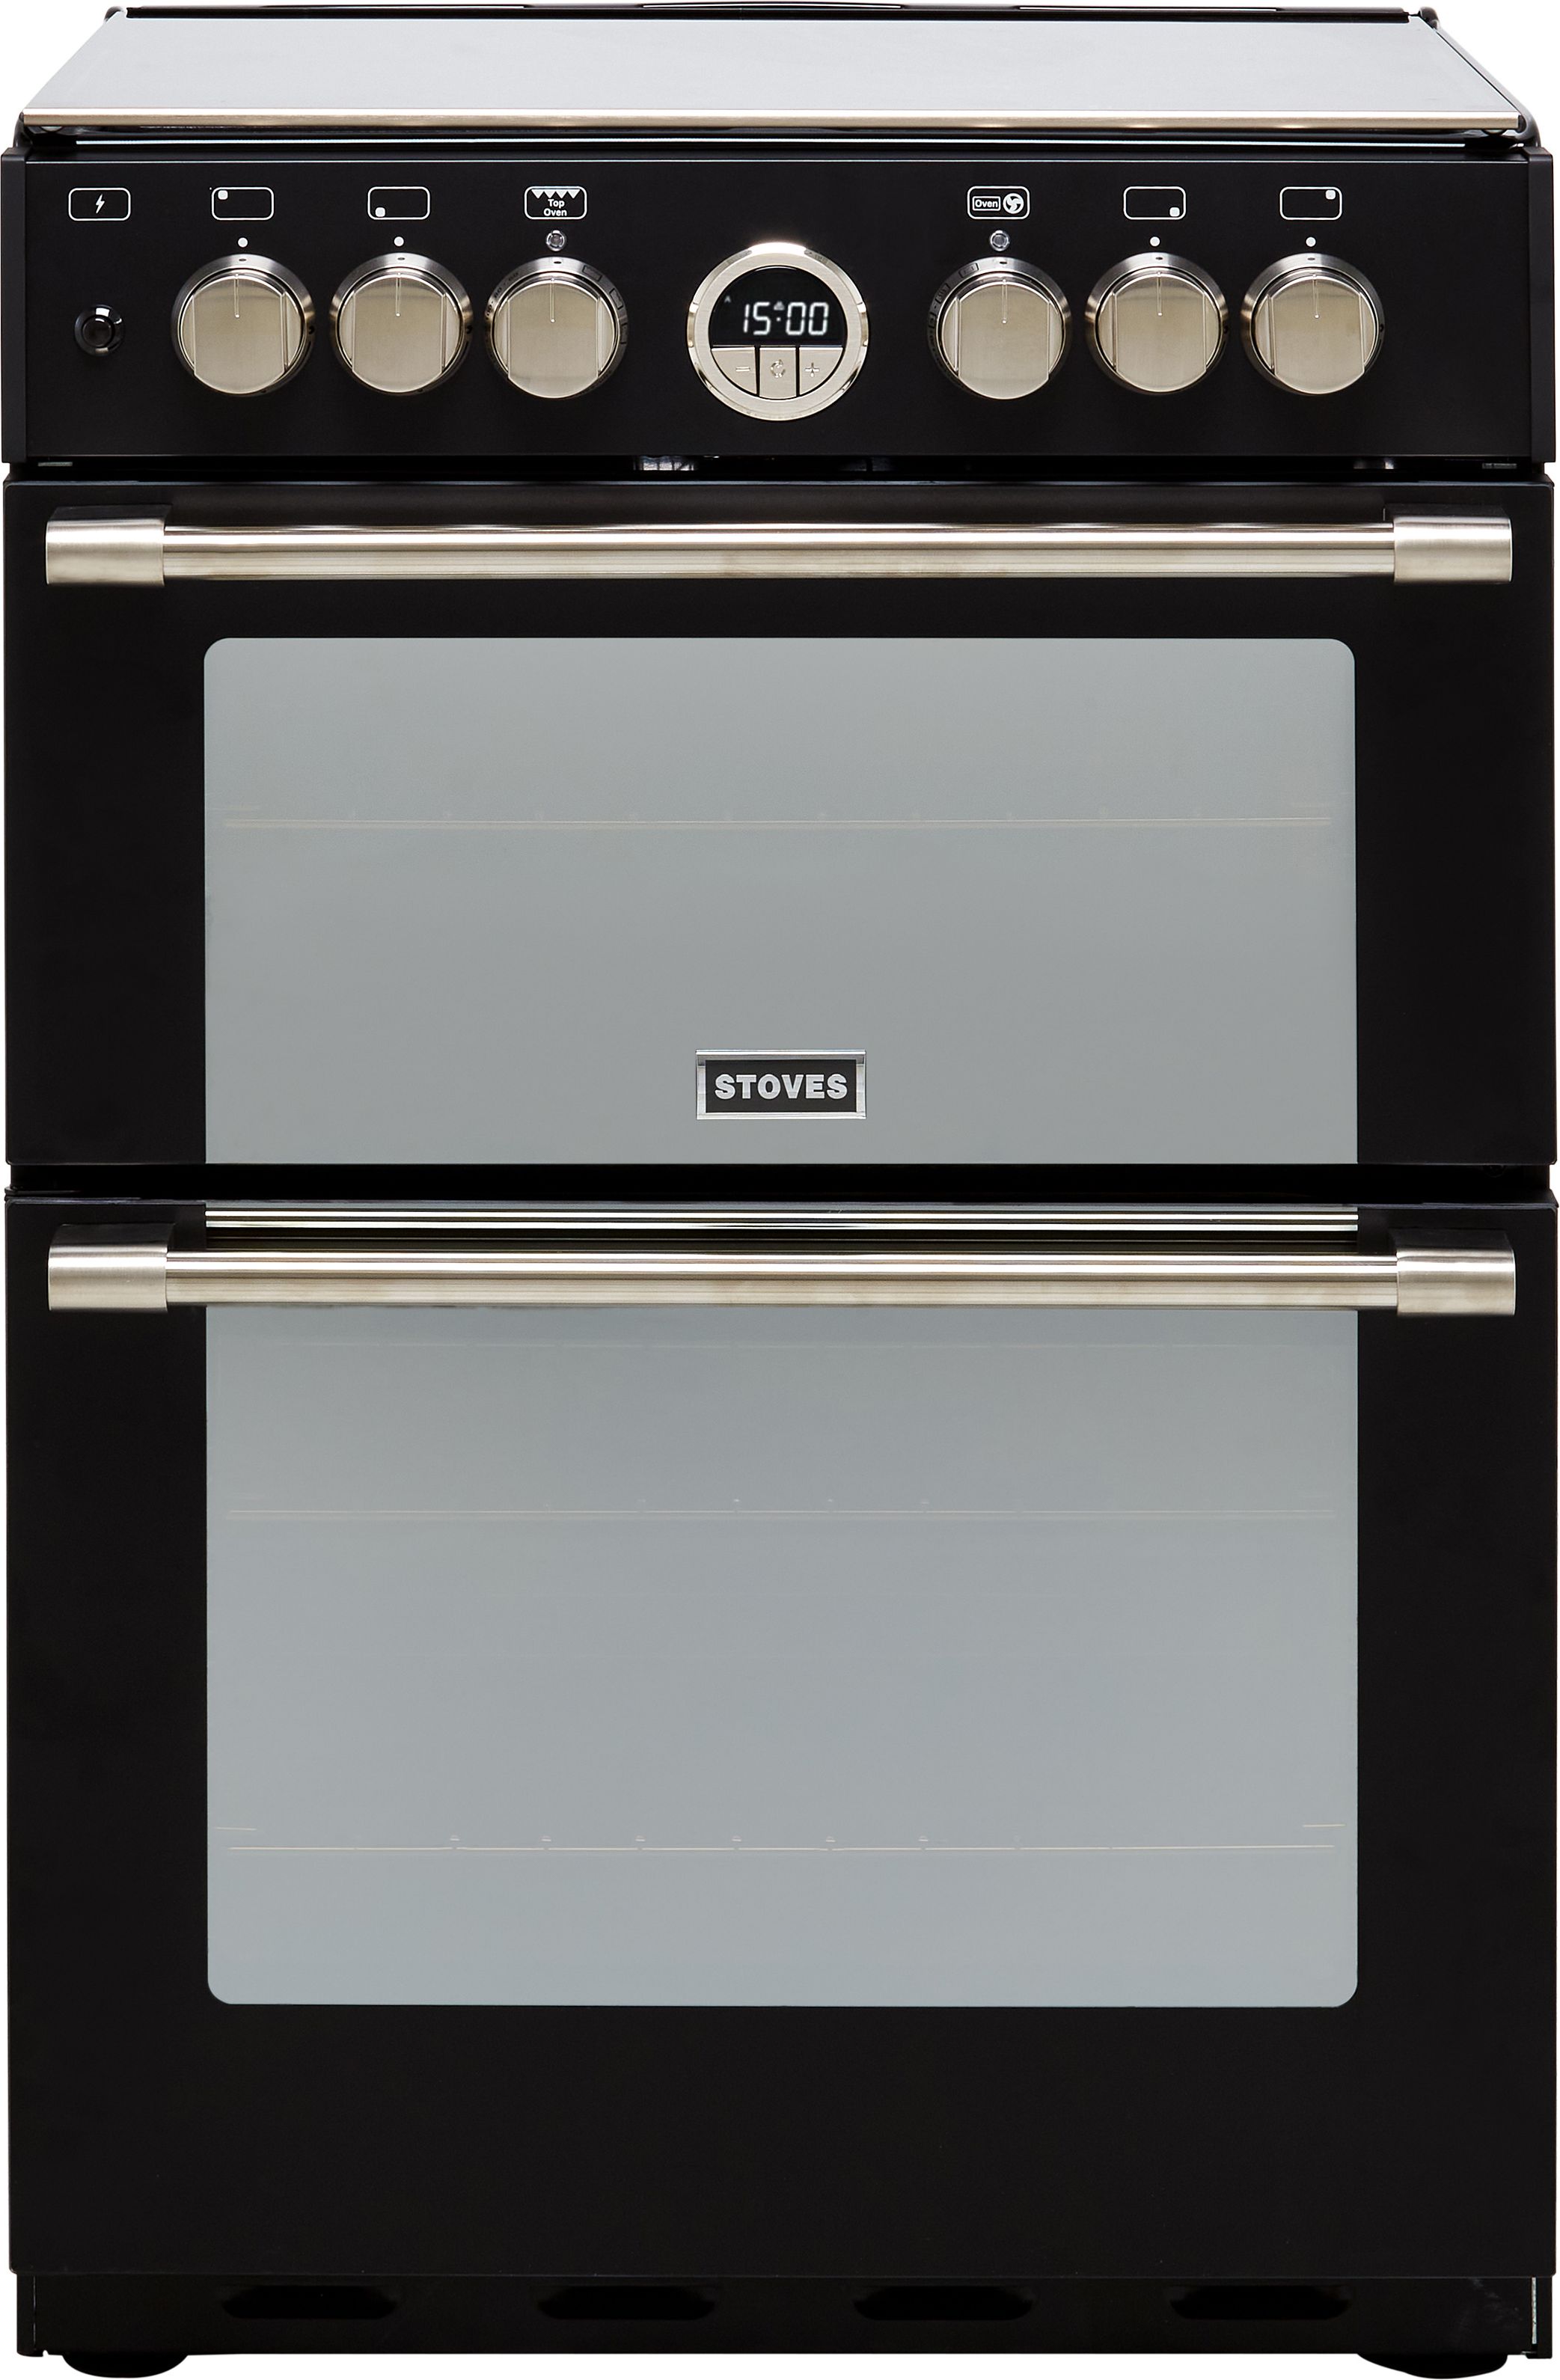 Stoves Sterling STERLING600DF 60cm Freestanding Dual Fuel Cooker - Black - A/A Rated, Black